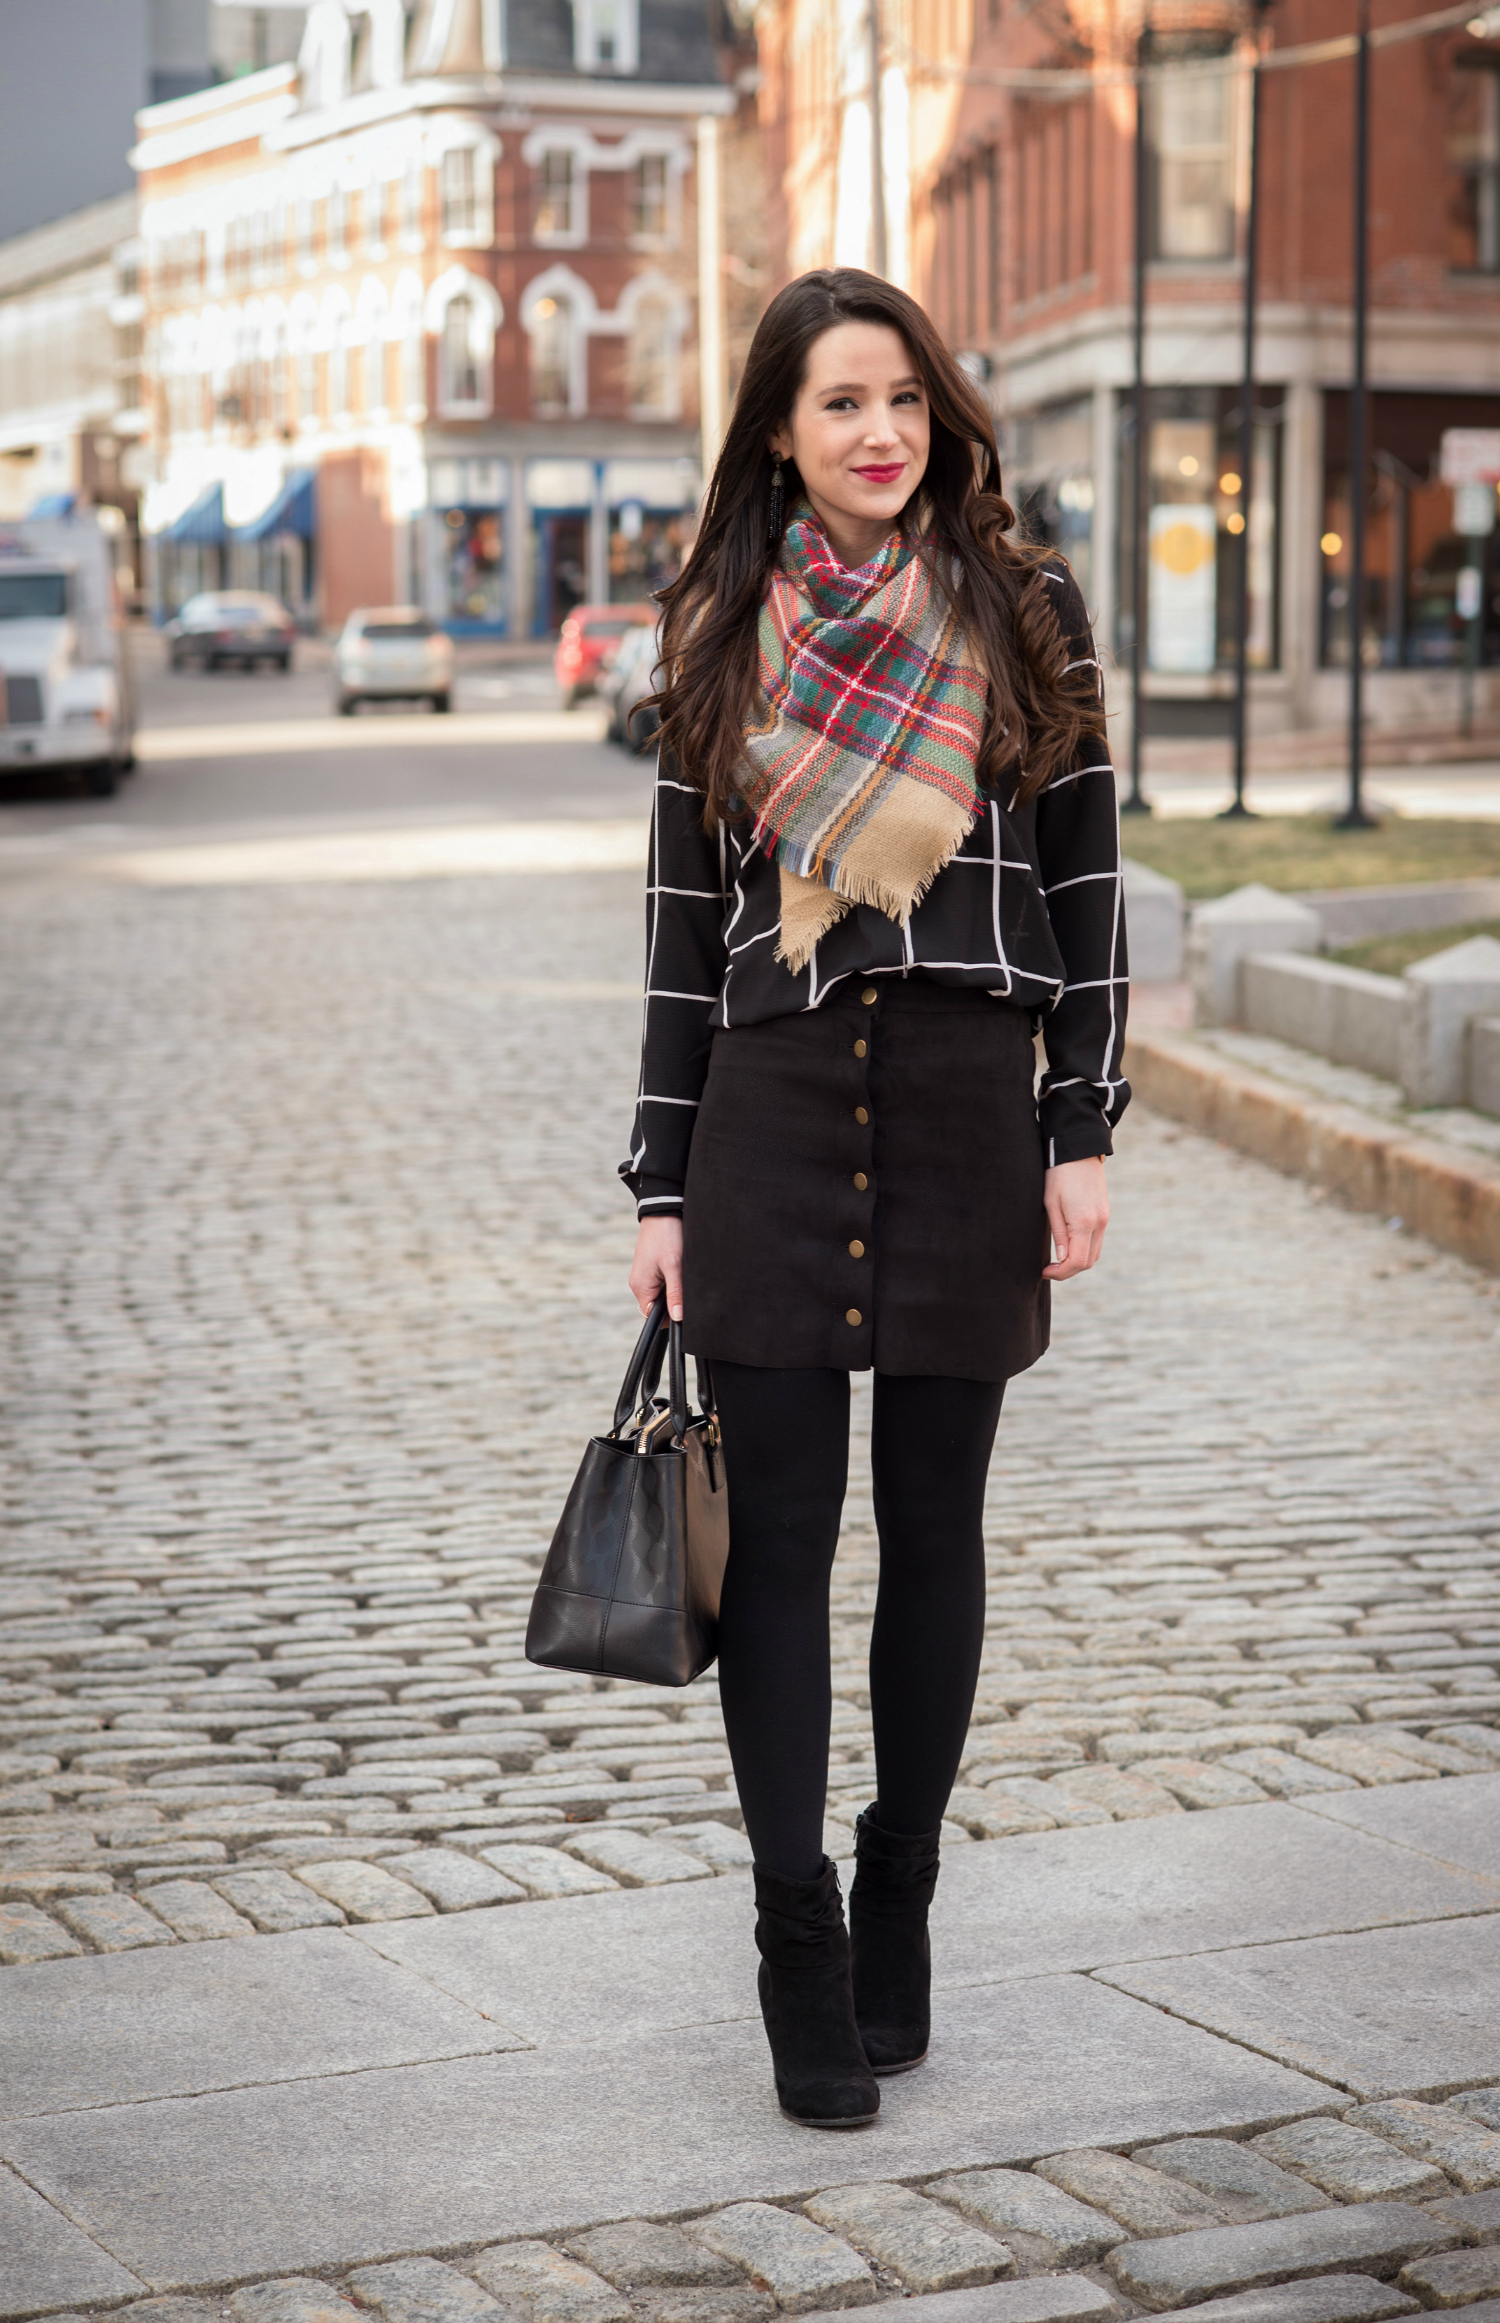 Chic all black winter outfit with a pop of color in the scarf